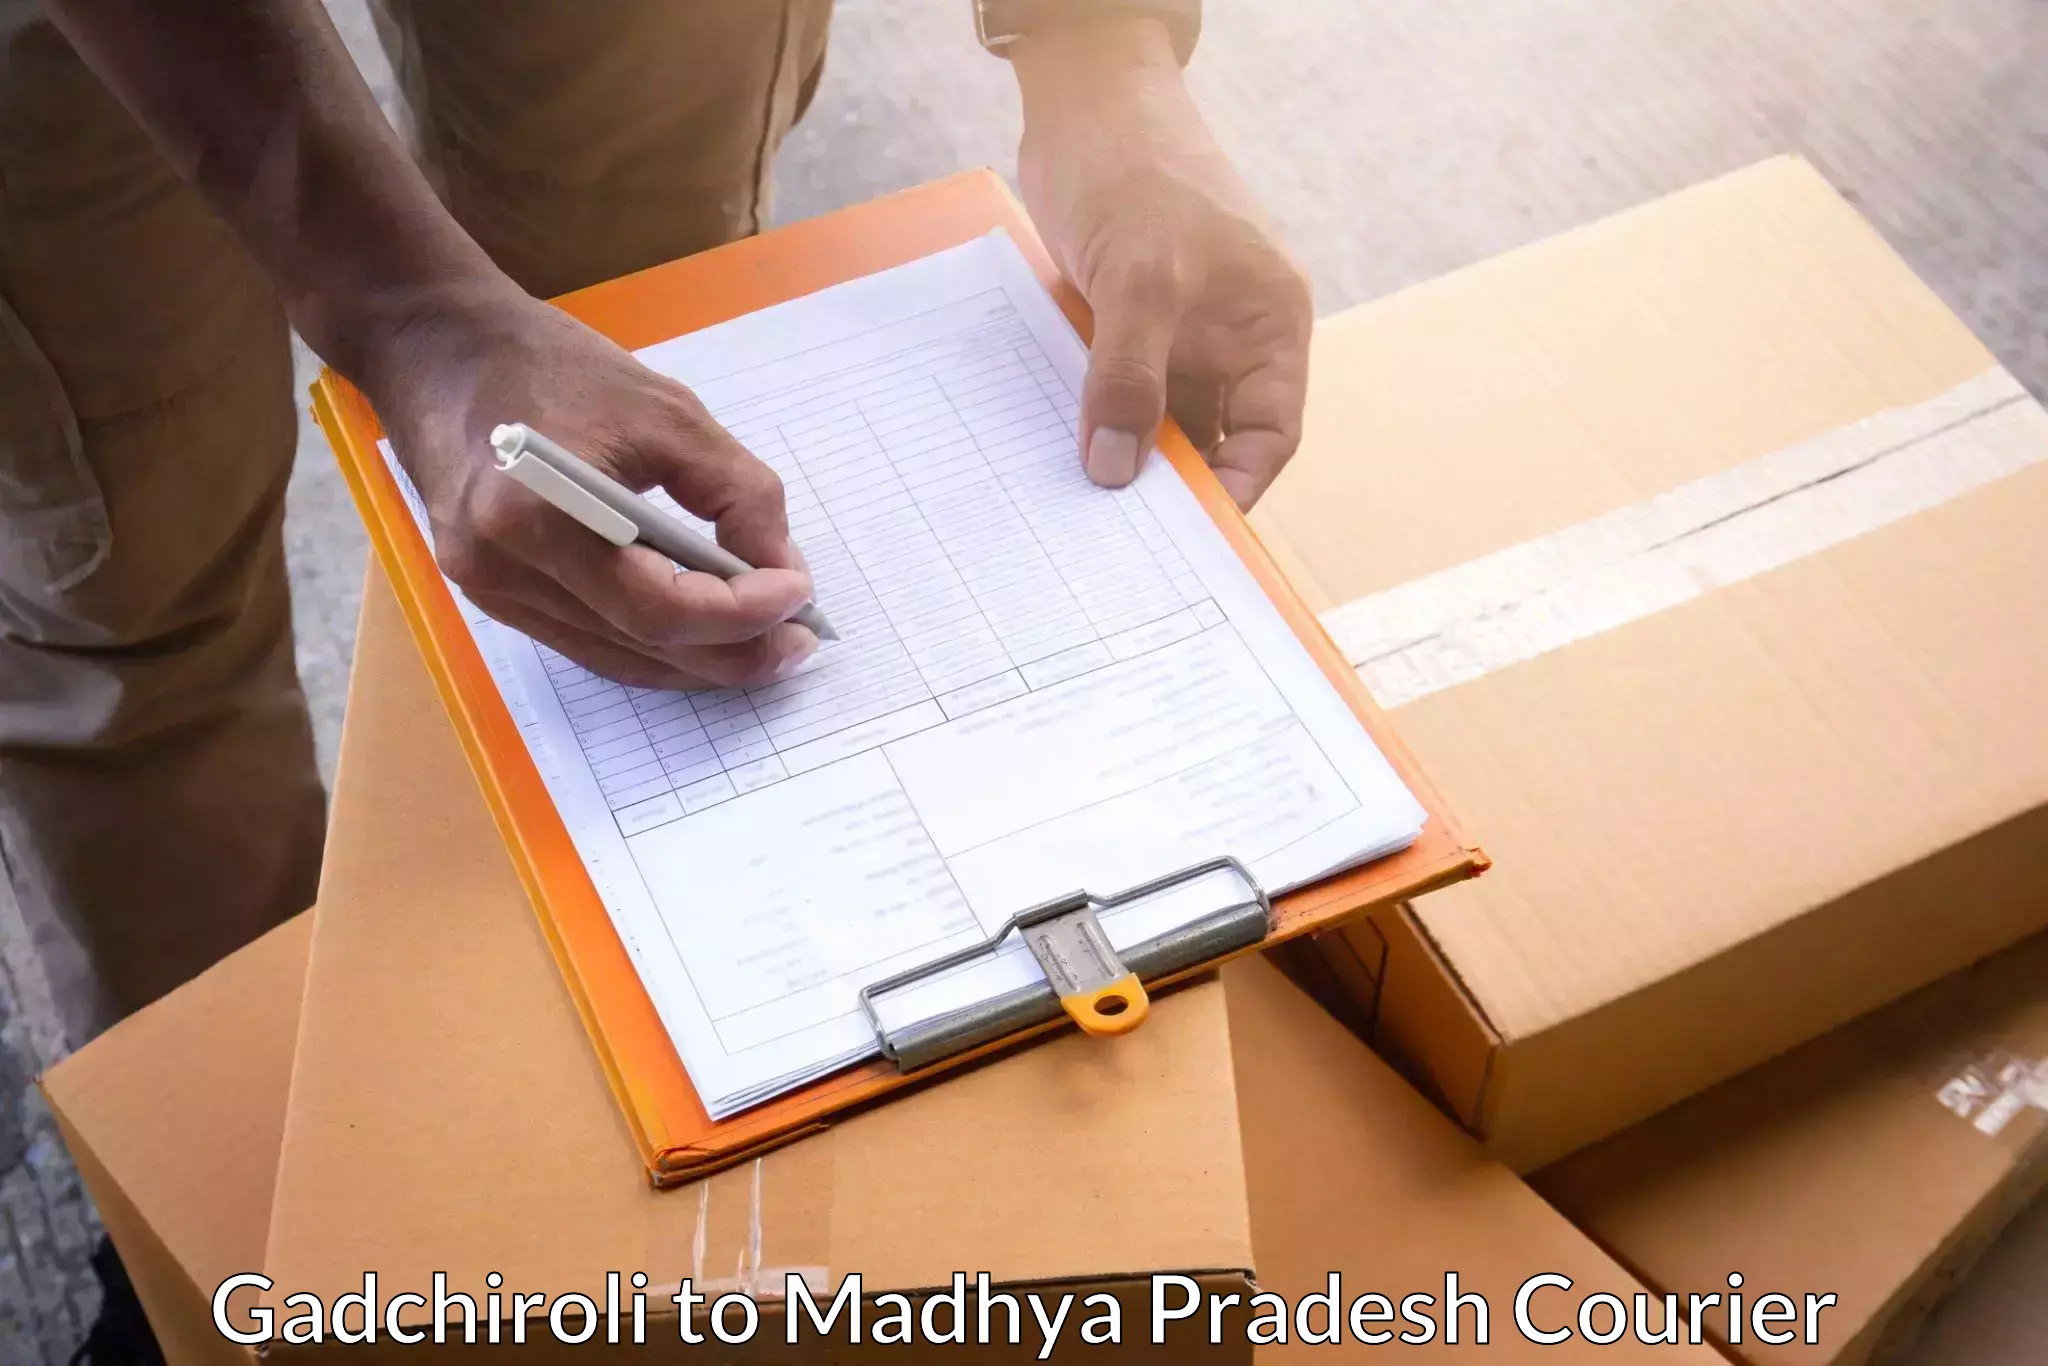 Personalized courier solutions Gadchiroli to IIIT Bhopal